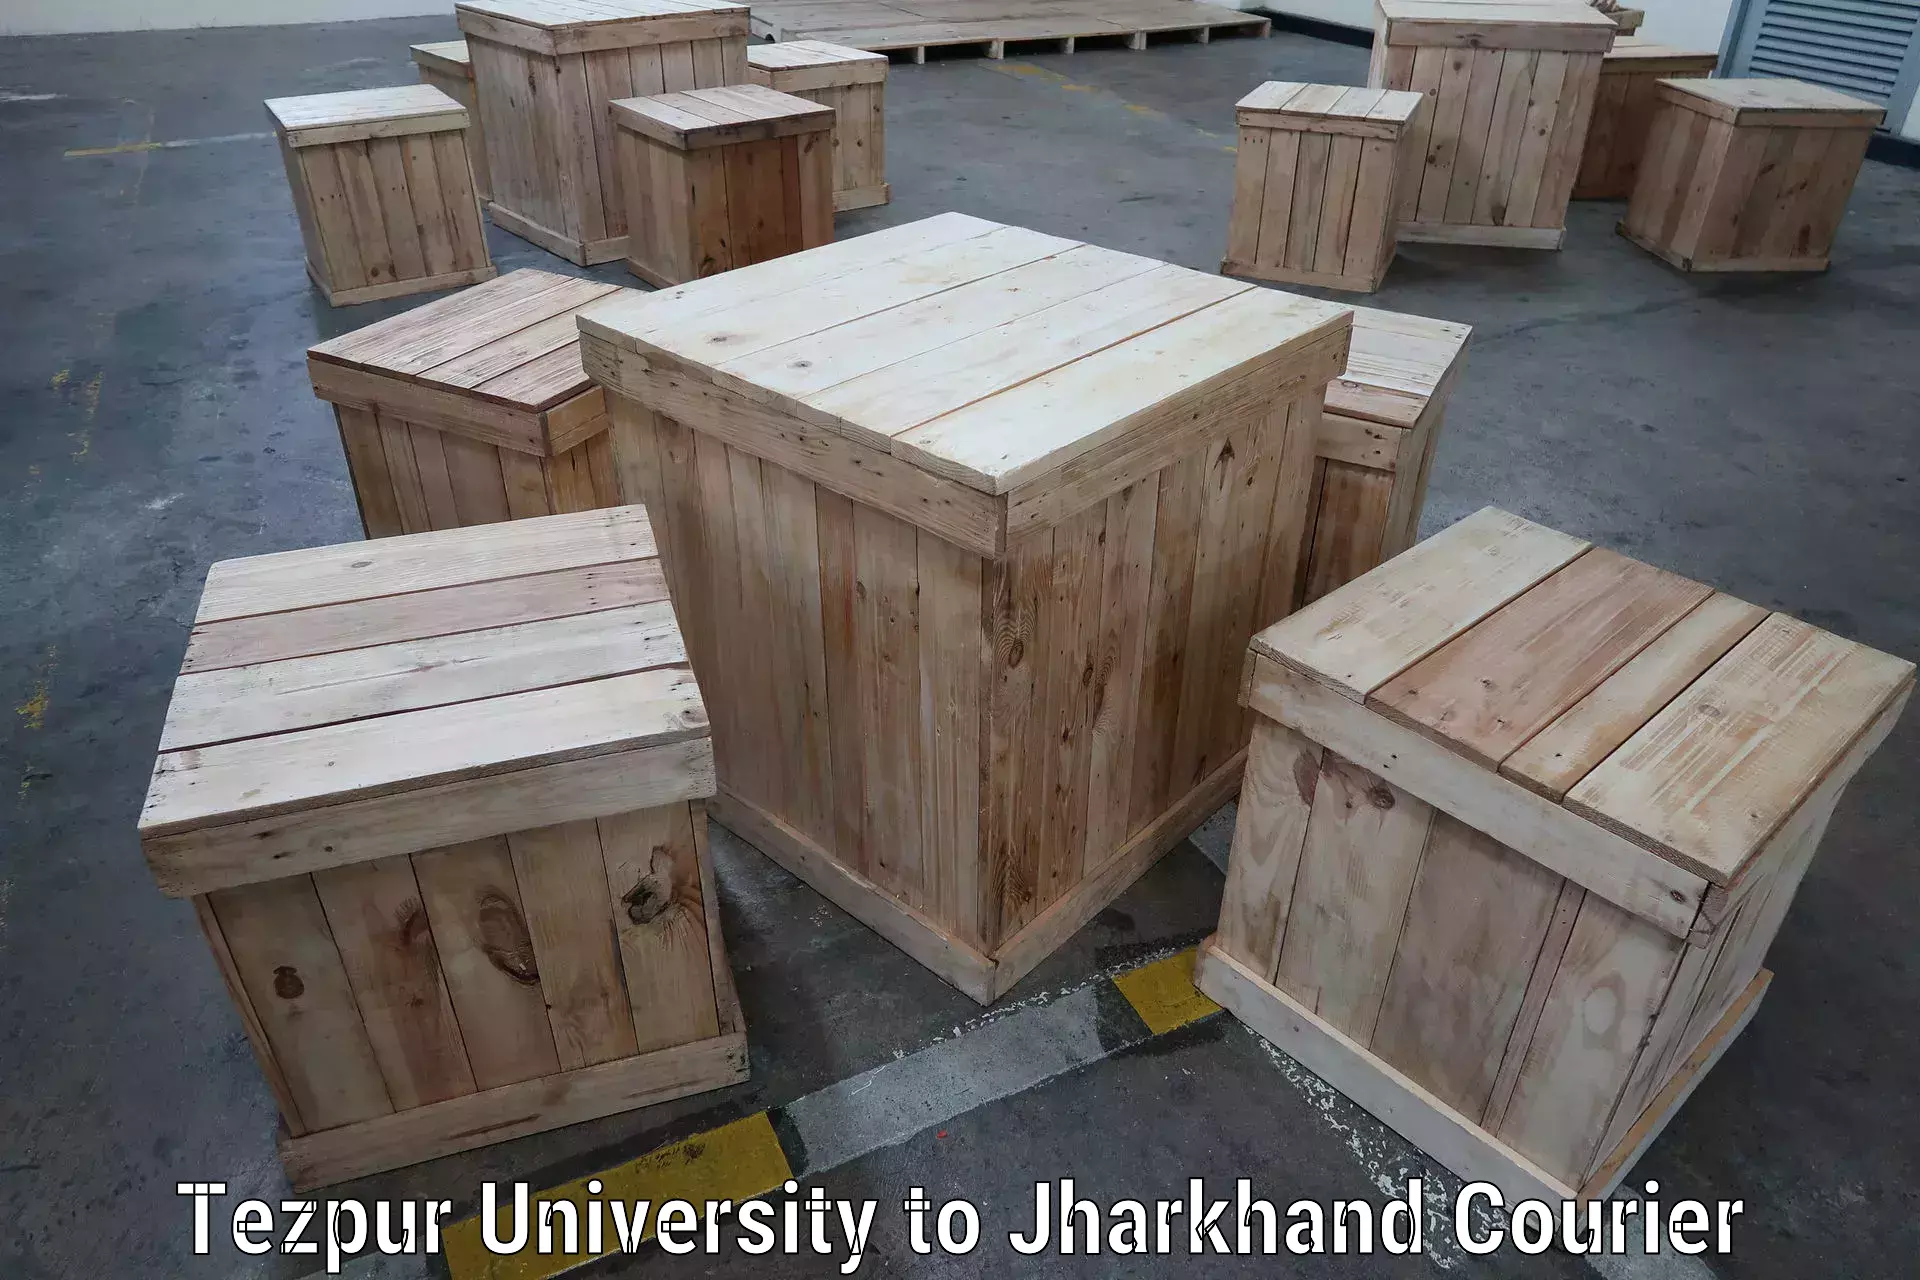 Modern parcel services in Tezpur University to Dhanbad